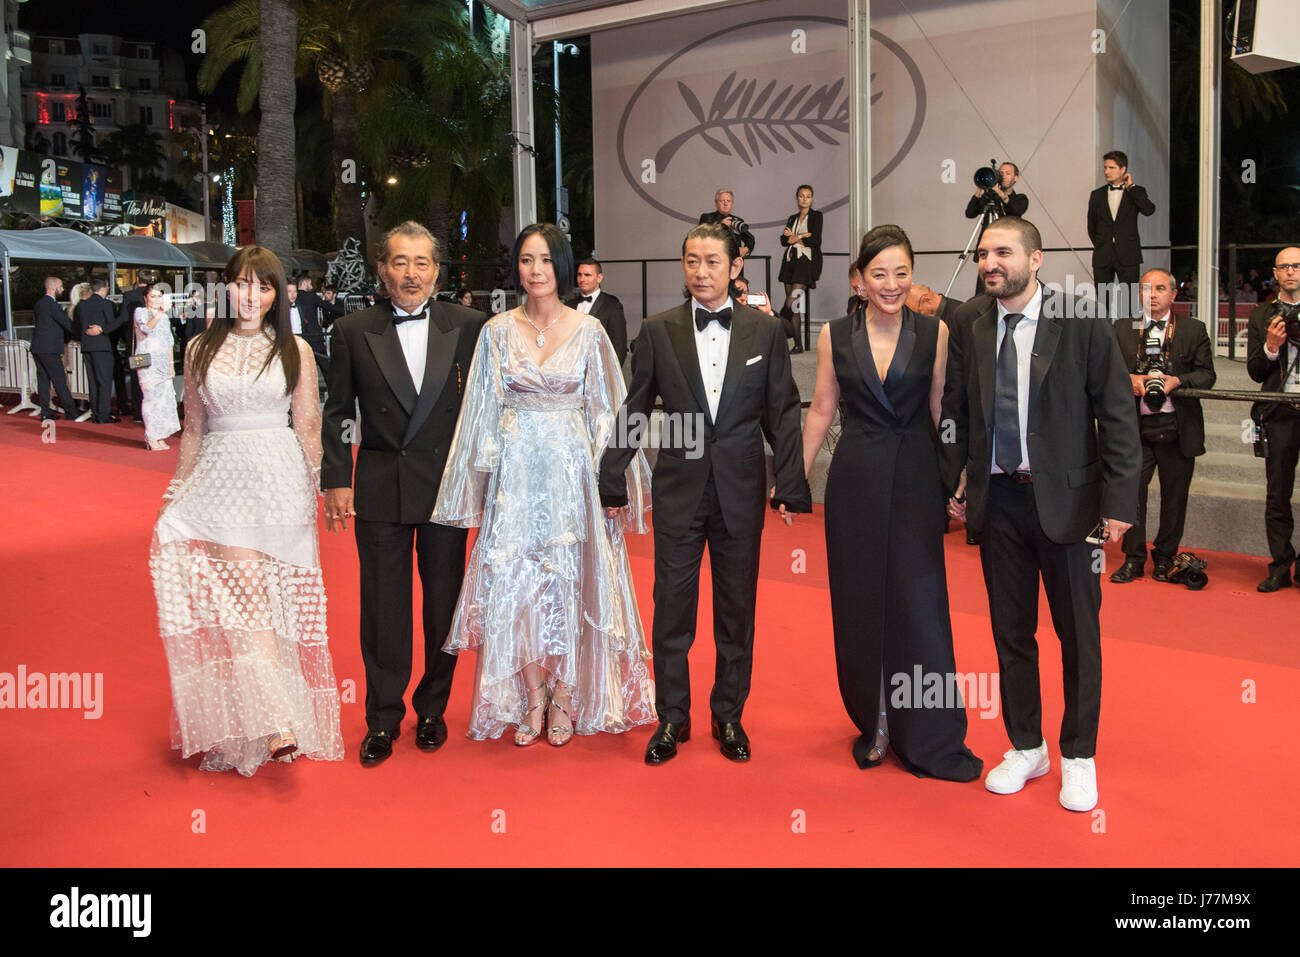 Cannes, France. 23rd May, 2017. Actress Ayame Misaki, actor Tatsuya Fuji, Director Naomi Kawase, actor Masatoshi Nagase, actress Misuzu Kanno and composer Ibrahim Maalouf (L-R), pose on the red carpet for the screening of the film 'Radiance' in competition at the 70th Cannes Film Festival in Cannes, France, May 23, 2017. Credit: Chen Yichen/Xinhua/Alamy Live News Stock Photo